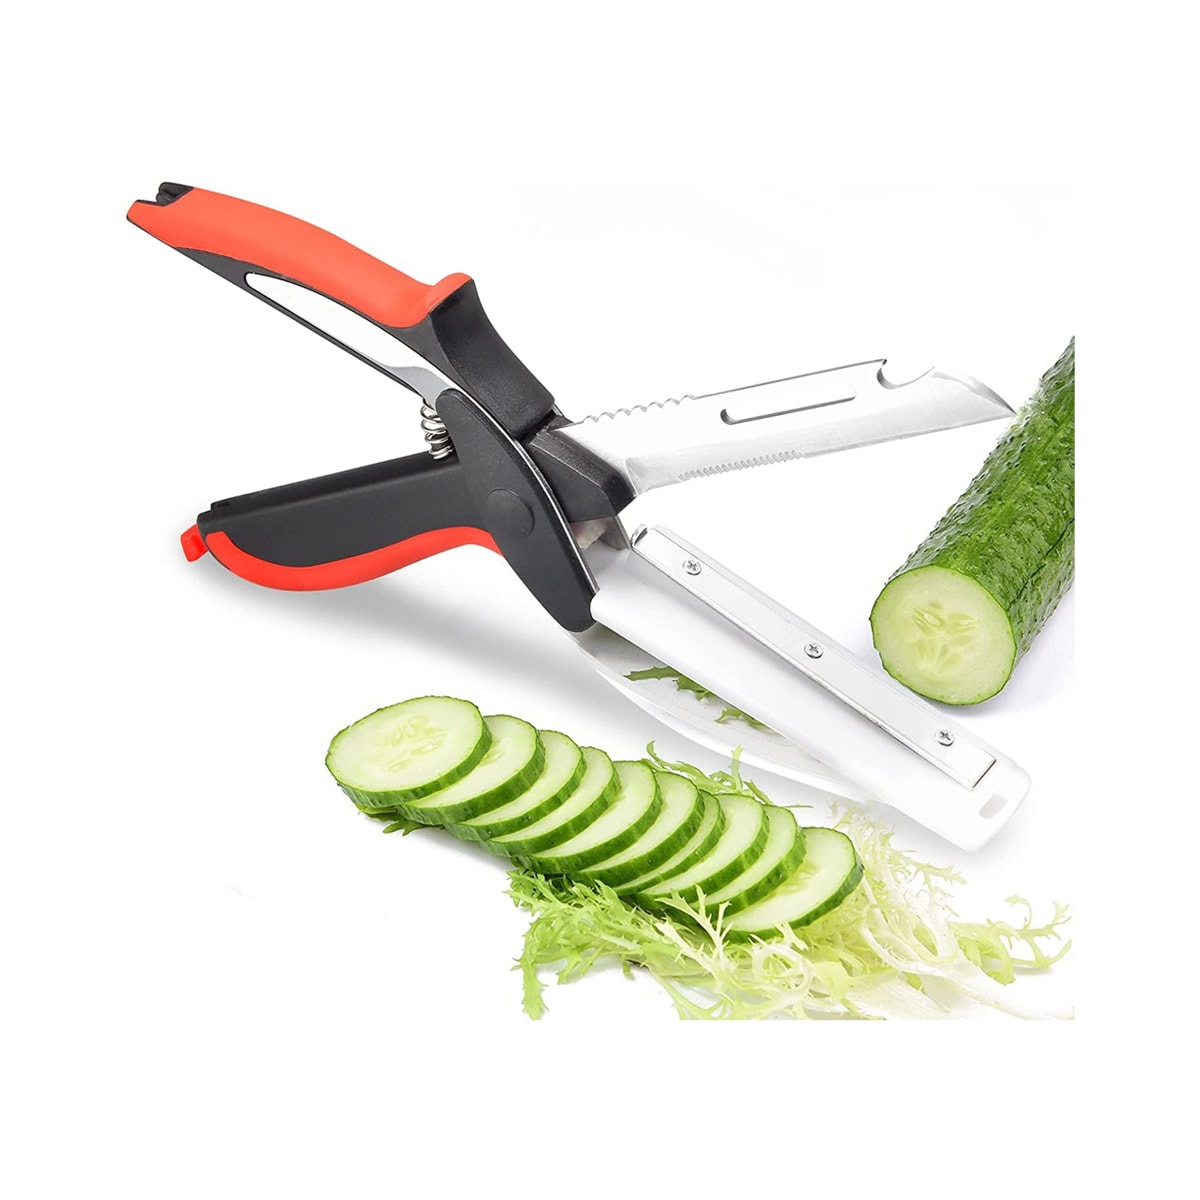 A pair of cutters that can cut through fruits and vegetables next to part of a cucumber and several cucumber slices.